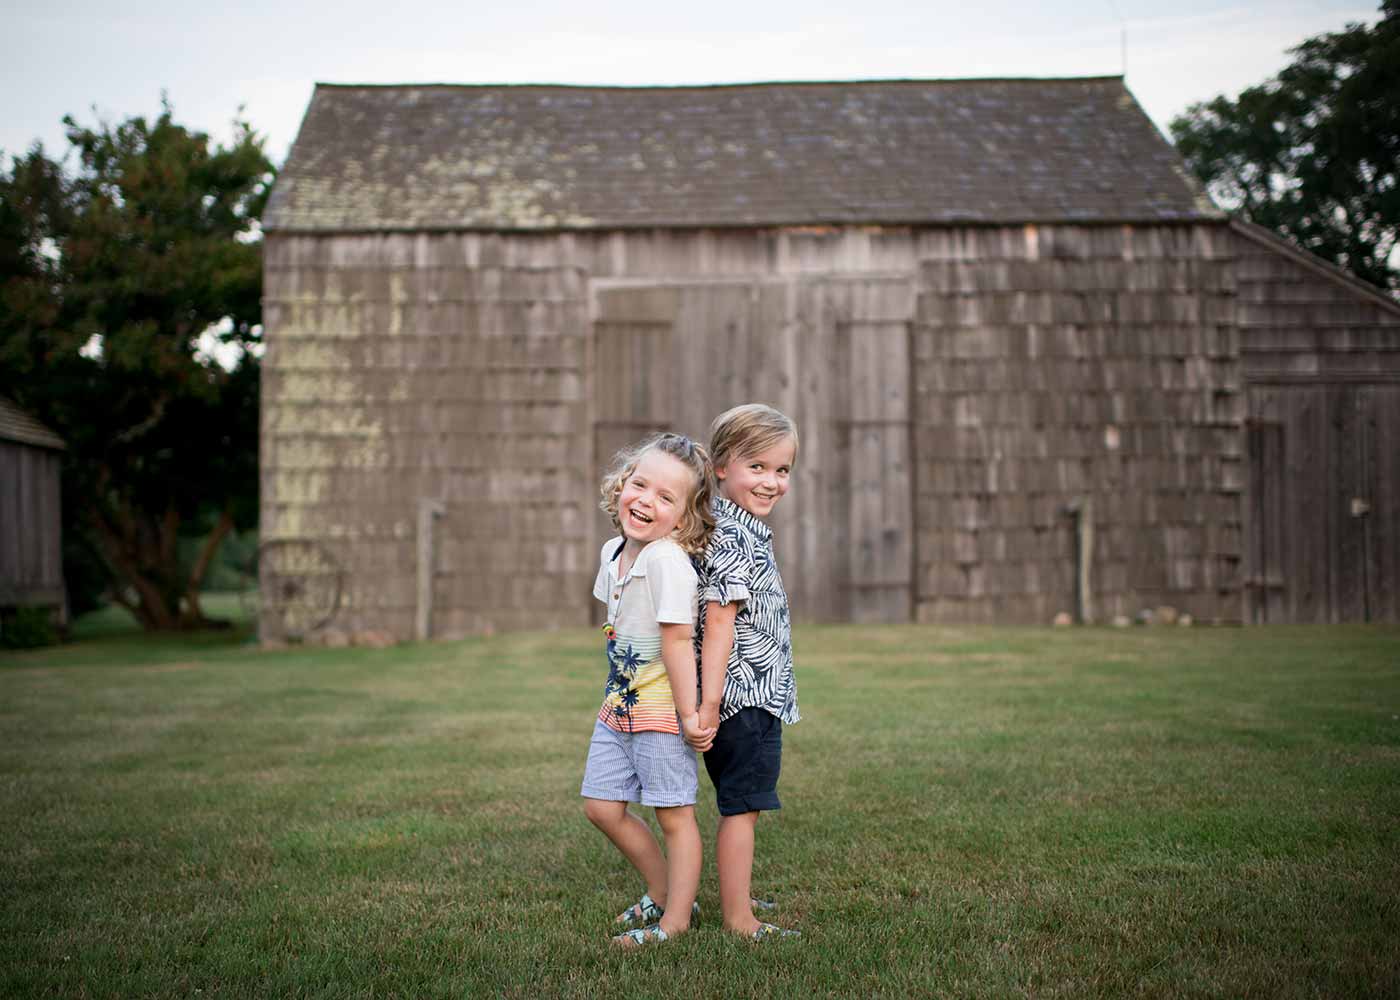 Two young boys sharing a laugh at a farm in the Hamptons